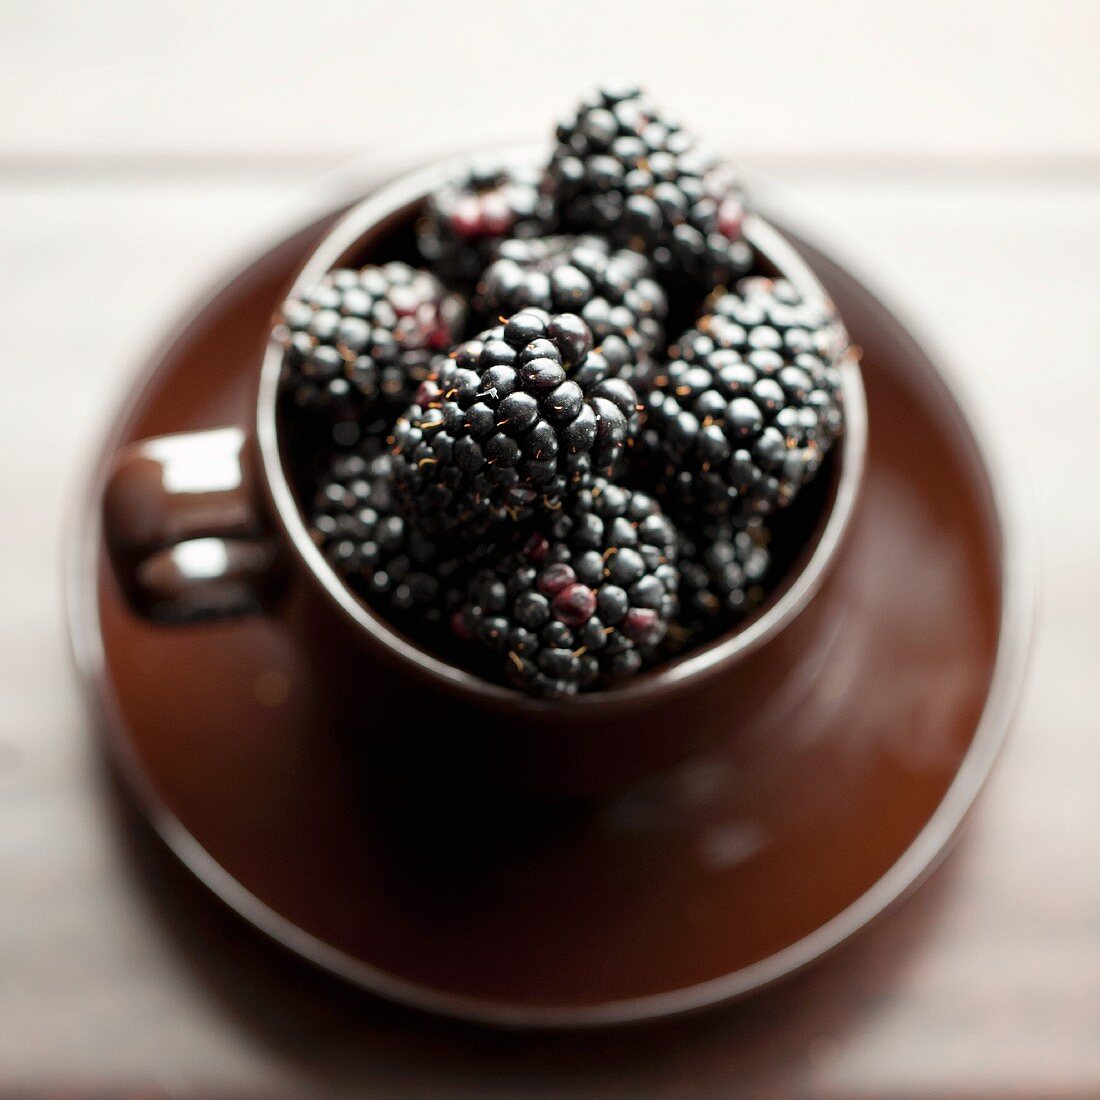 Blackberries in a Cup; From Above